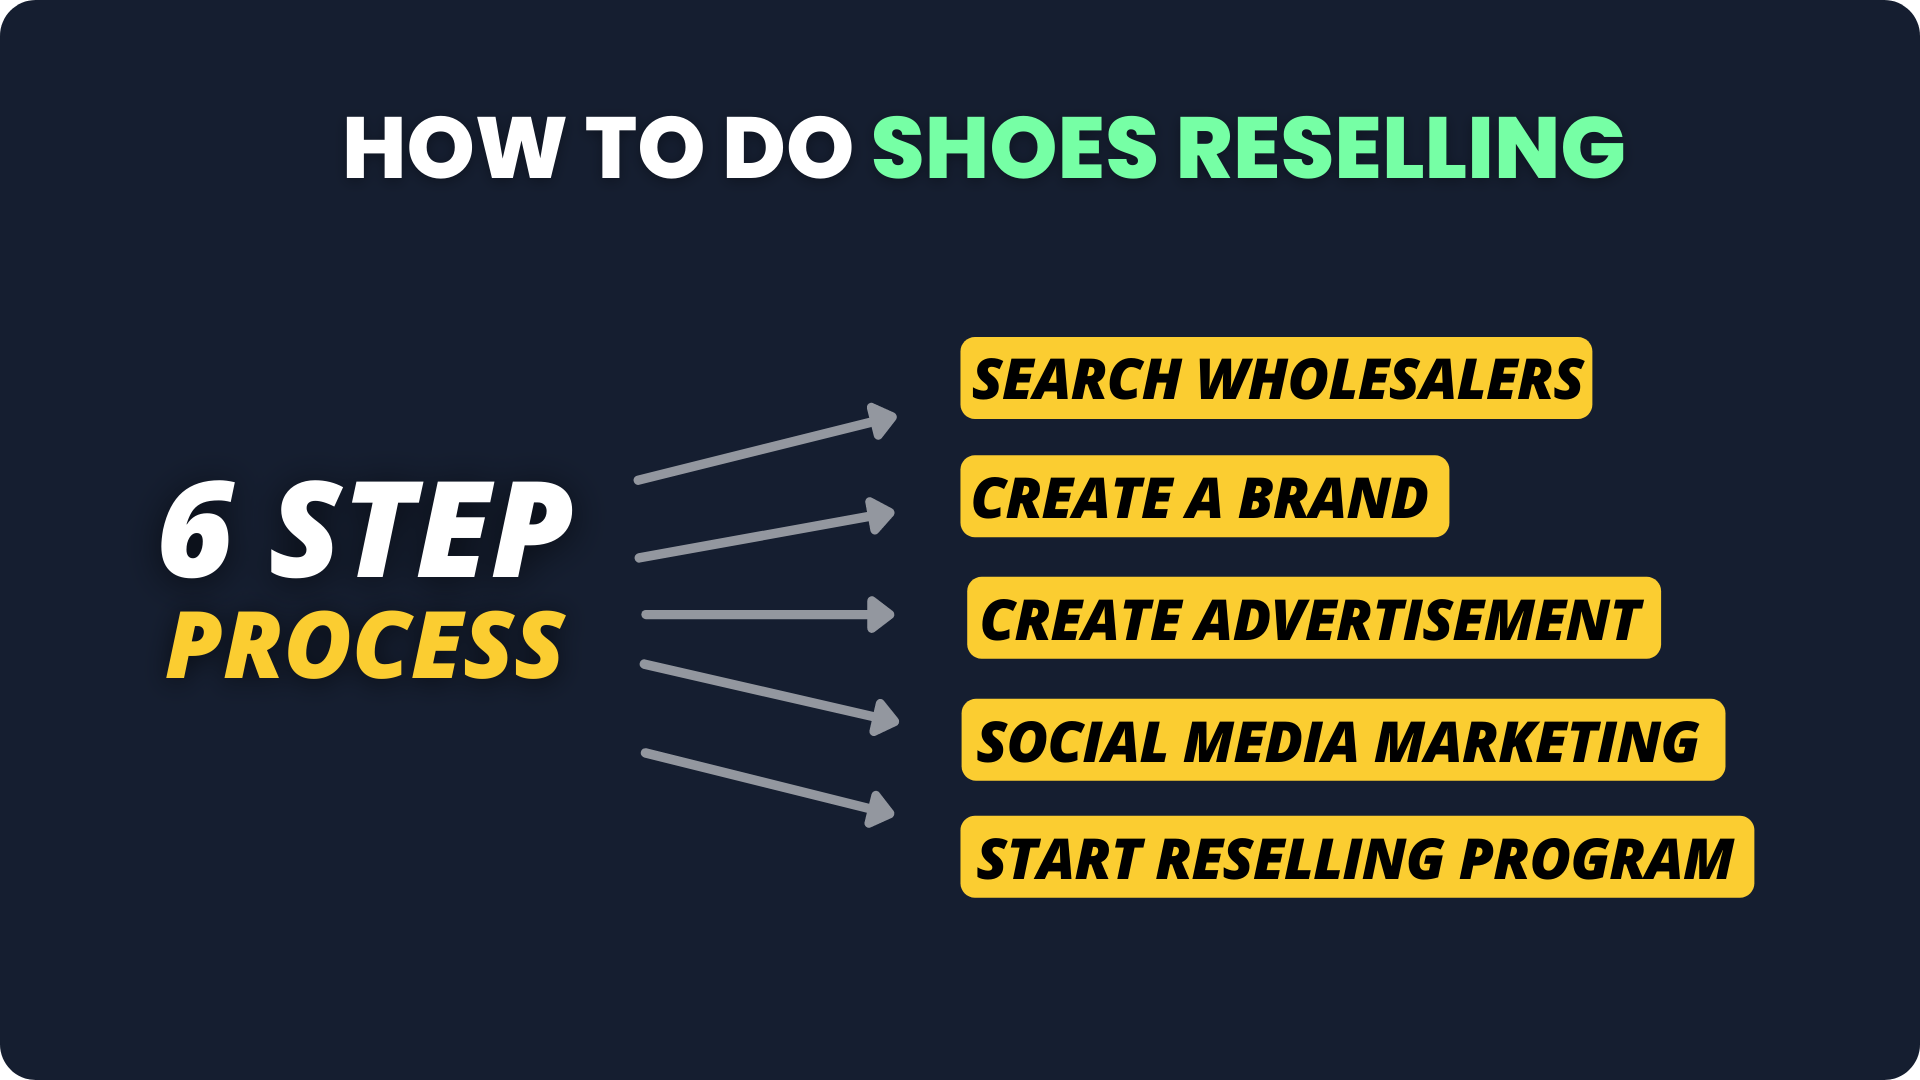 How to do shoes business